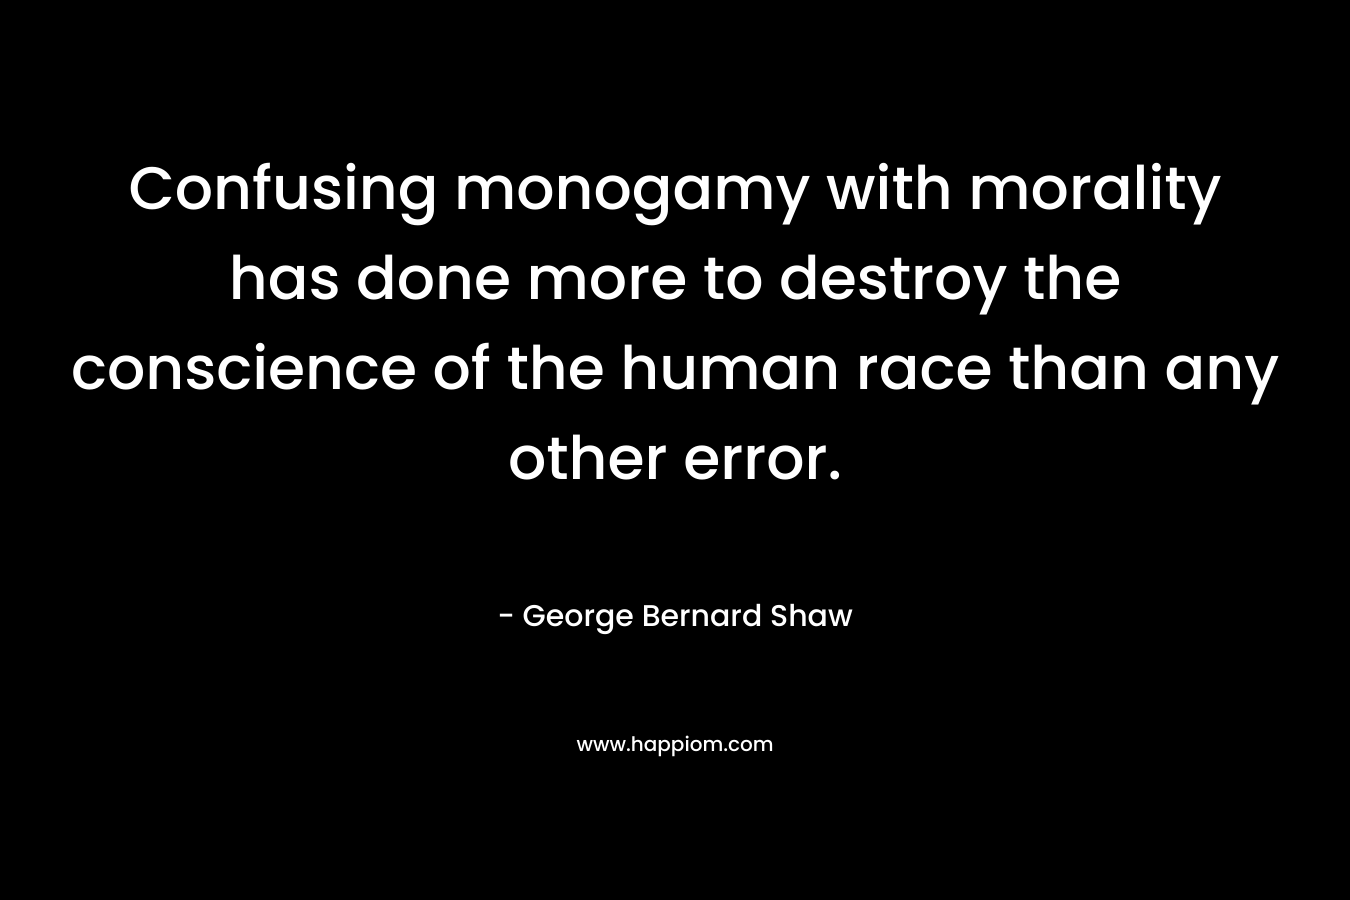 Confusing monogamy with morality has done more to destroy the conscience of the human race than any other error. – George Bernard Shaw